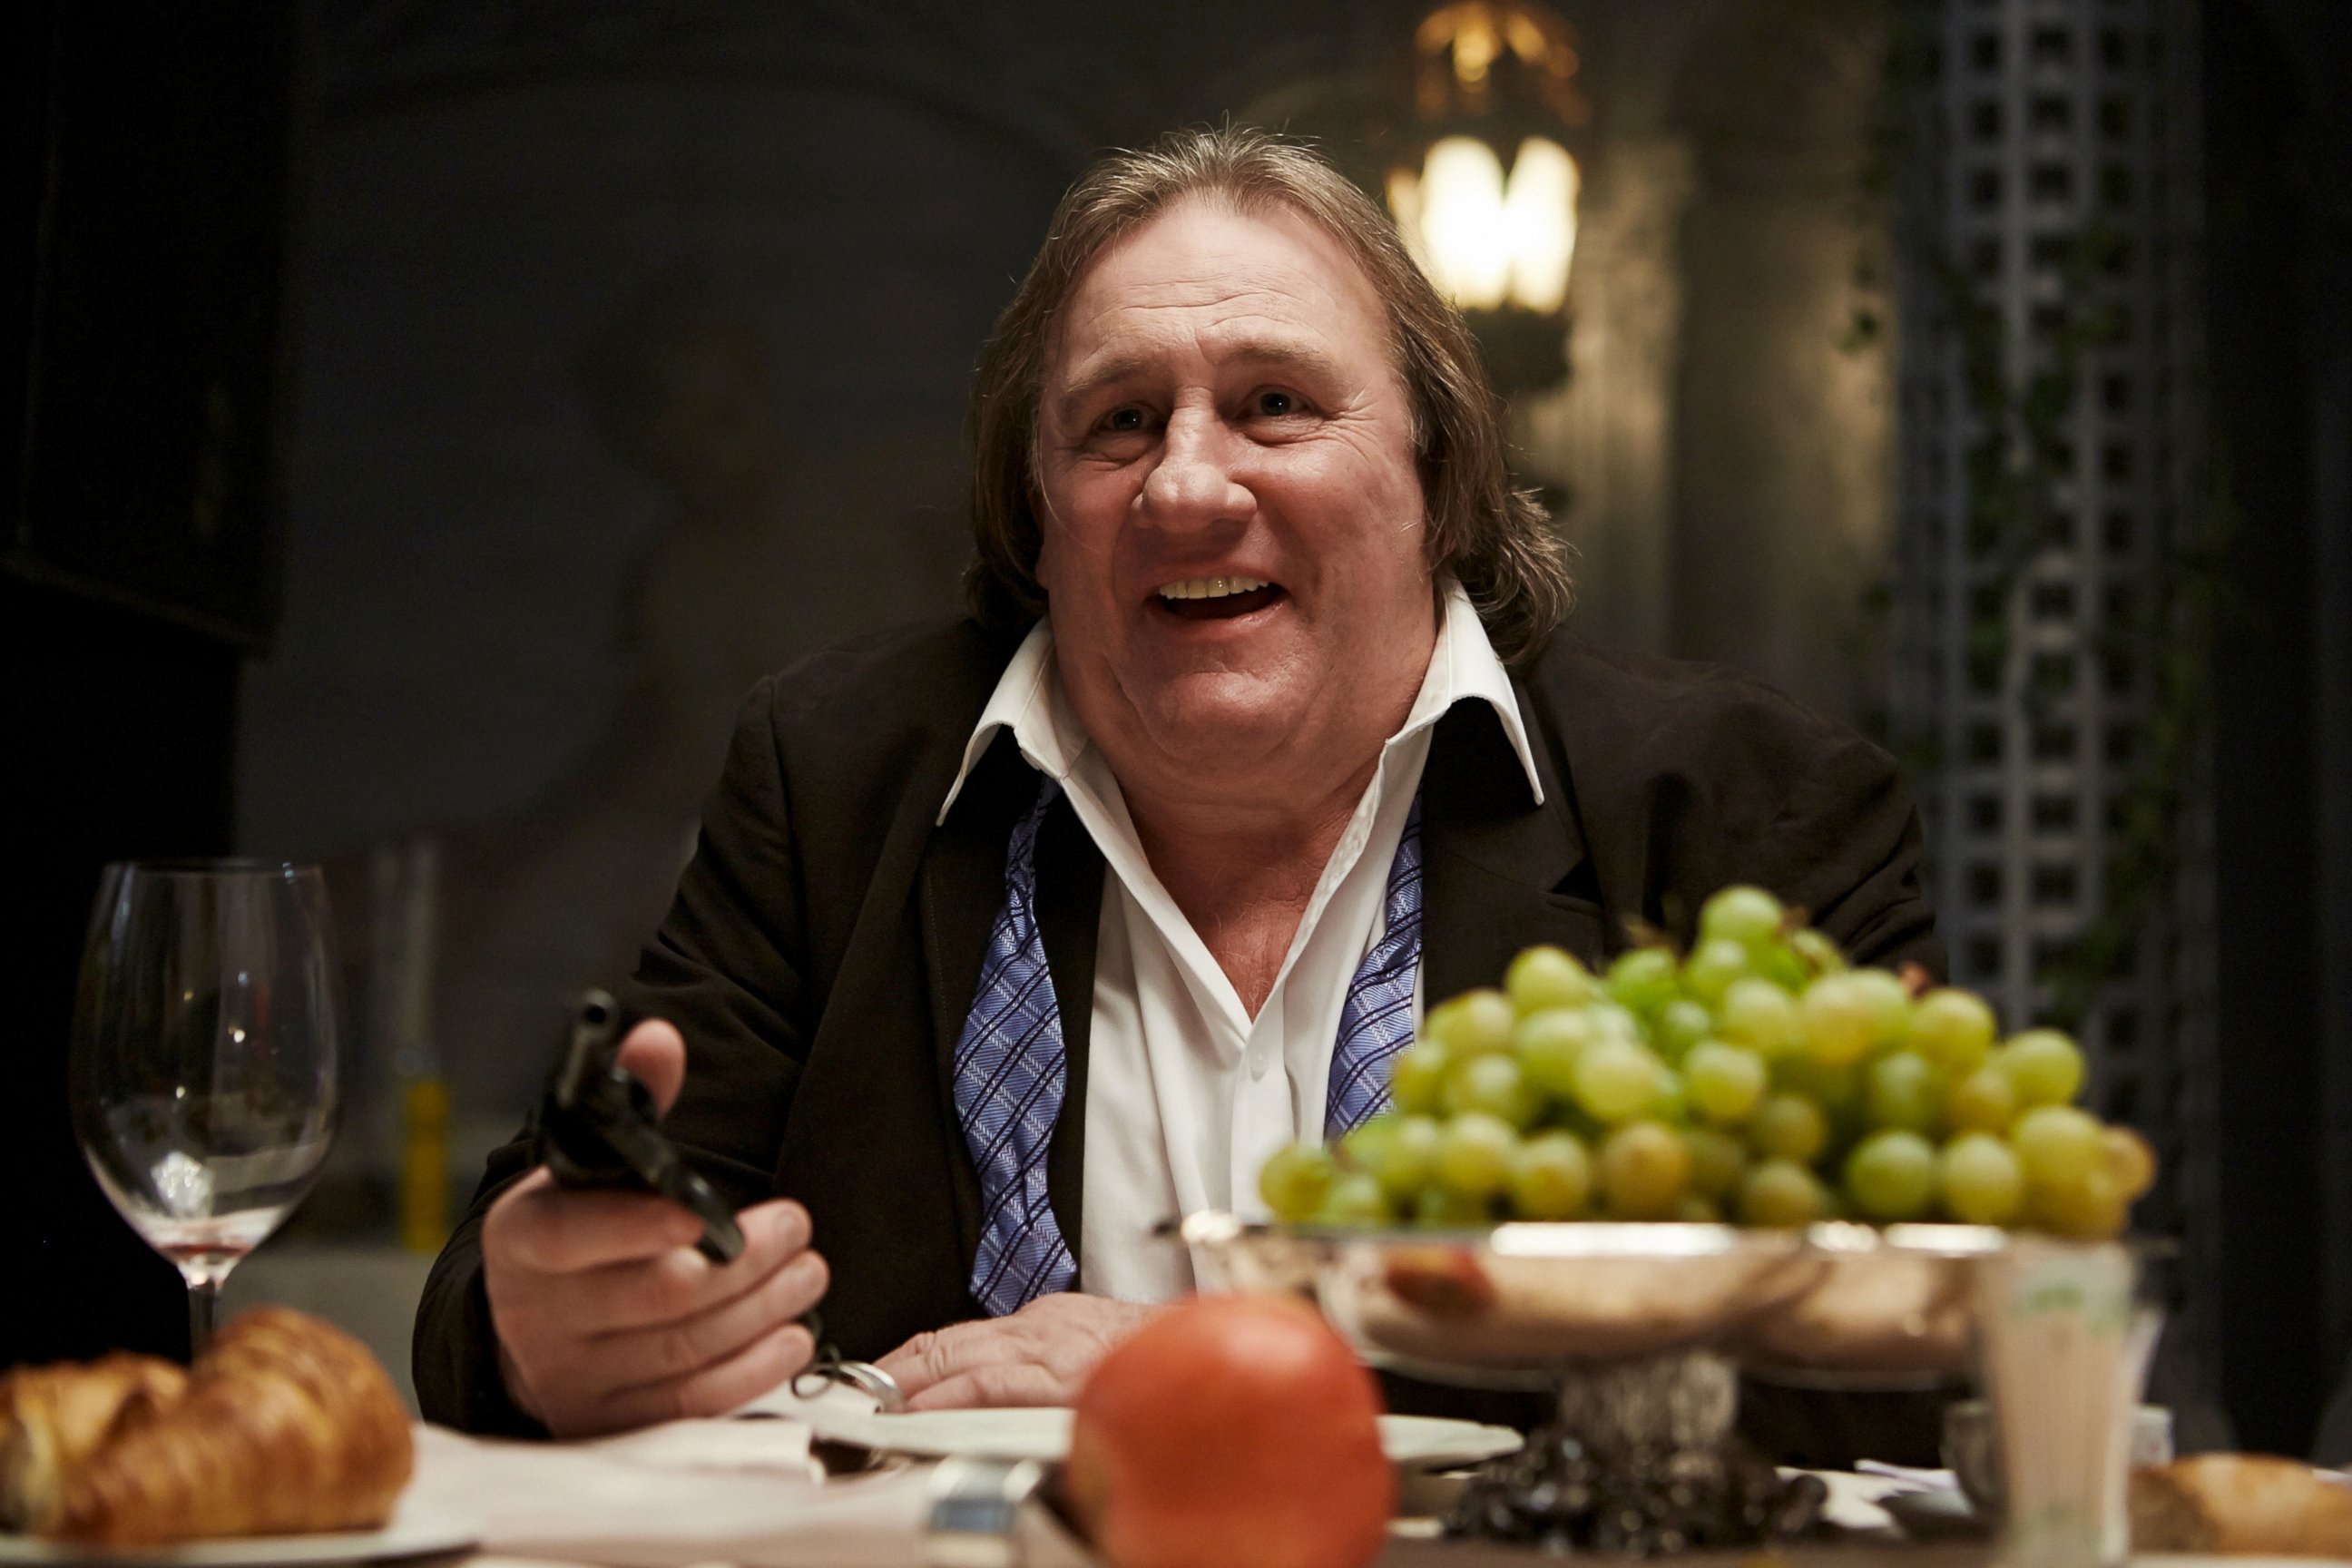 PHOTO: Gerard Depardieu shoots a scene from the movie 'Sex, Coffee & Cigarettes.'